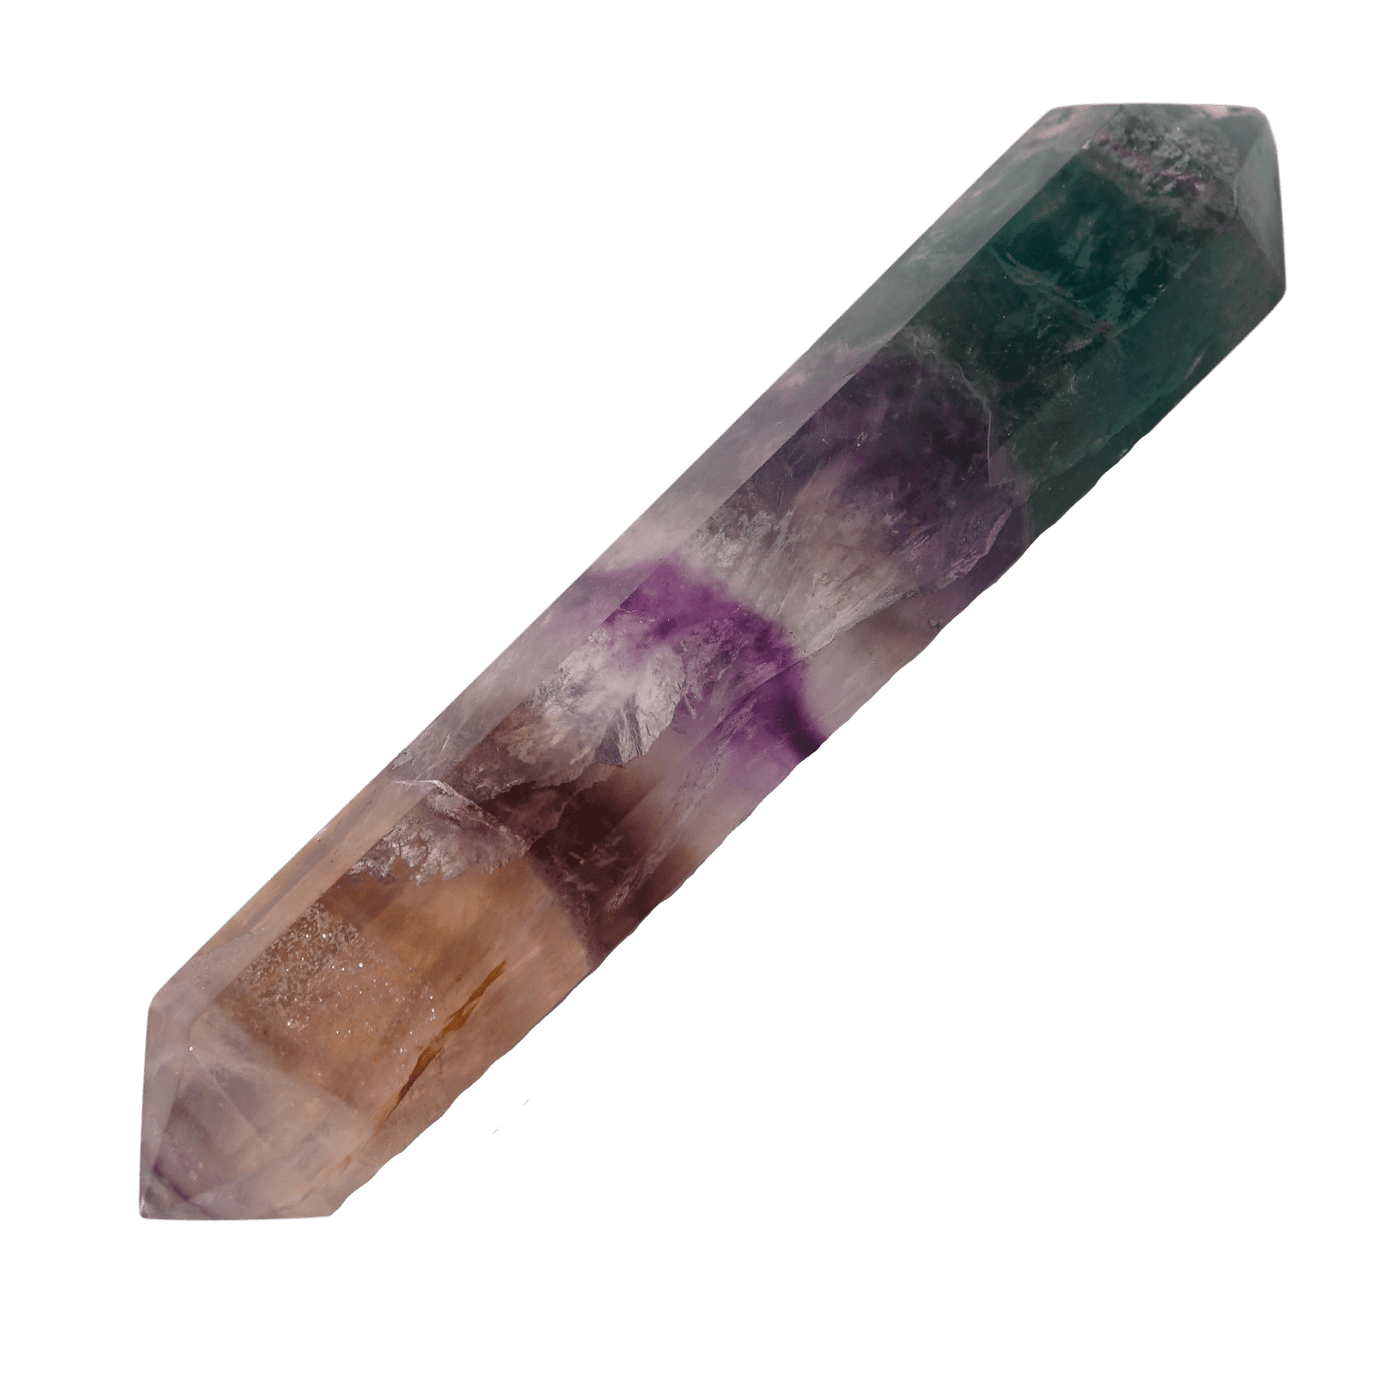 close up view of genuine Fluorite double terminated crystal wand point by Energy Muse with green, purple, and yellowish color gradients.